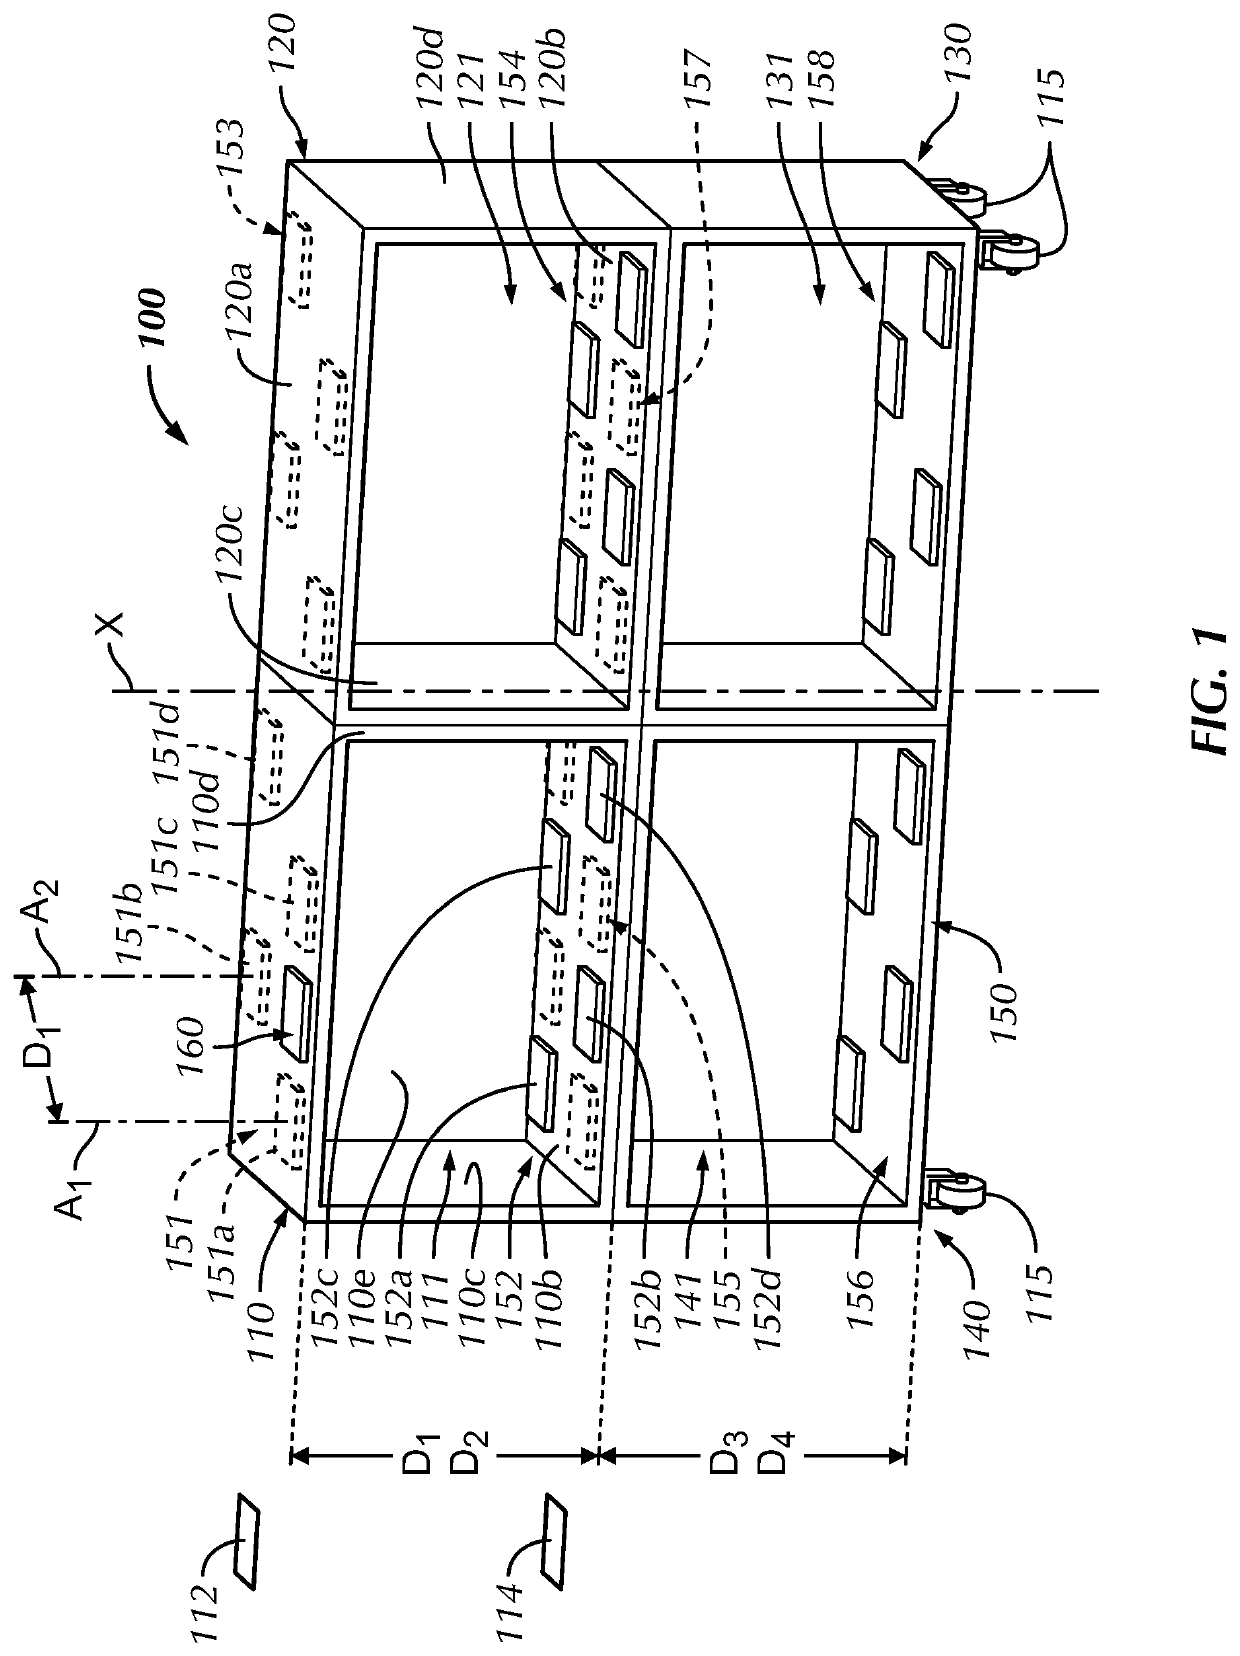 Surgical product supply system and method